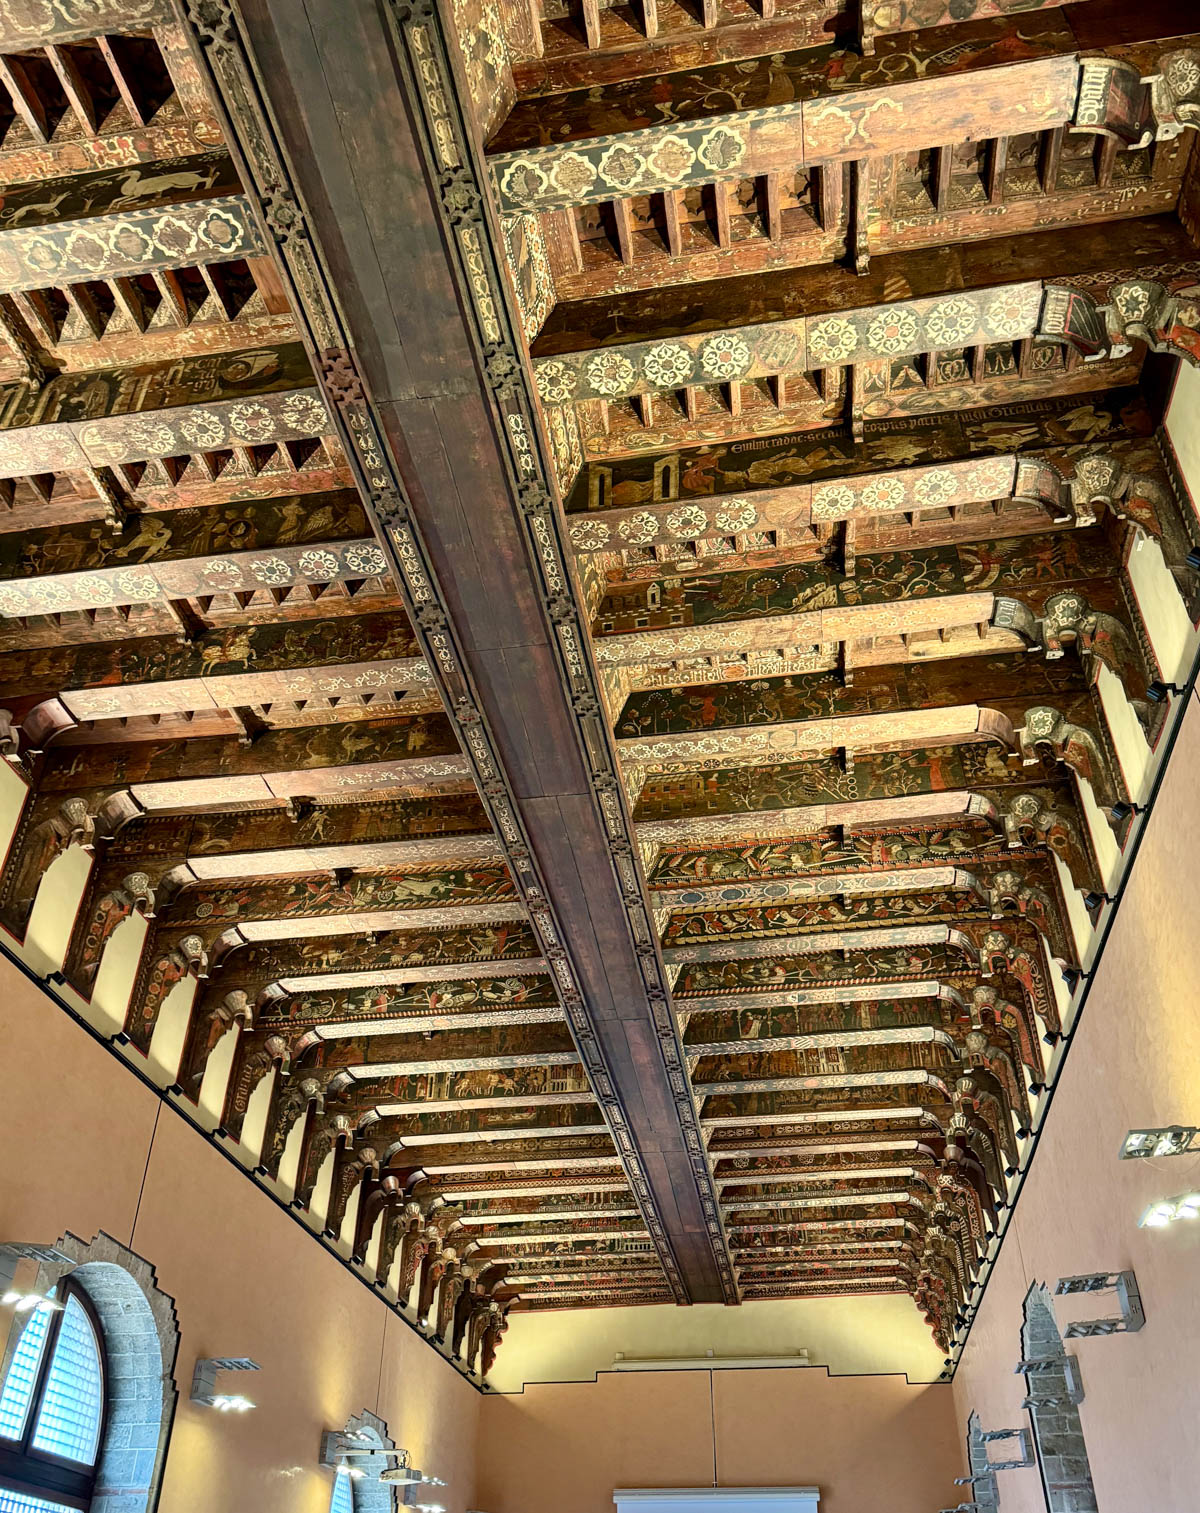 Wood ceiling at Steri Palermo in Sicily.